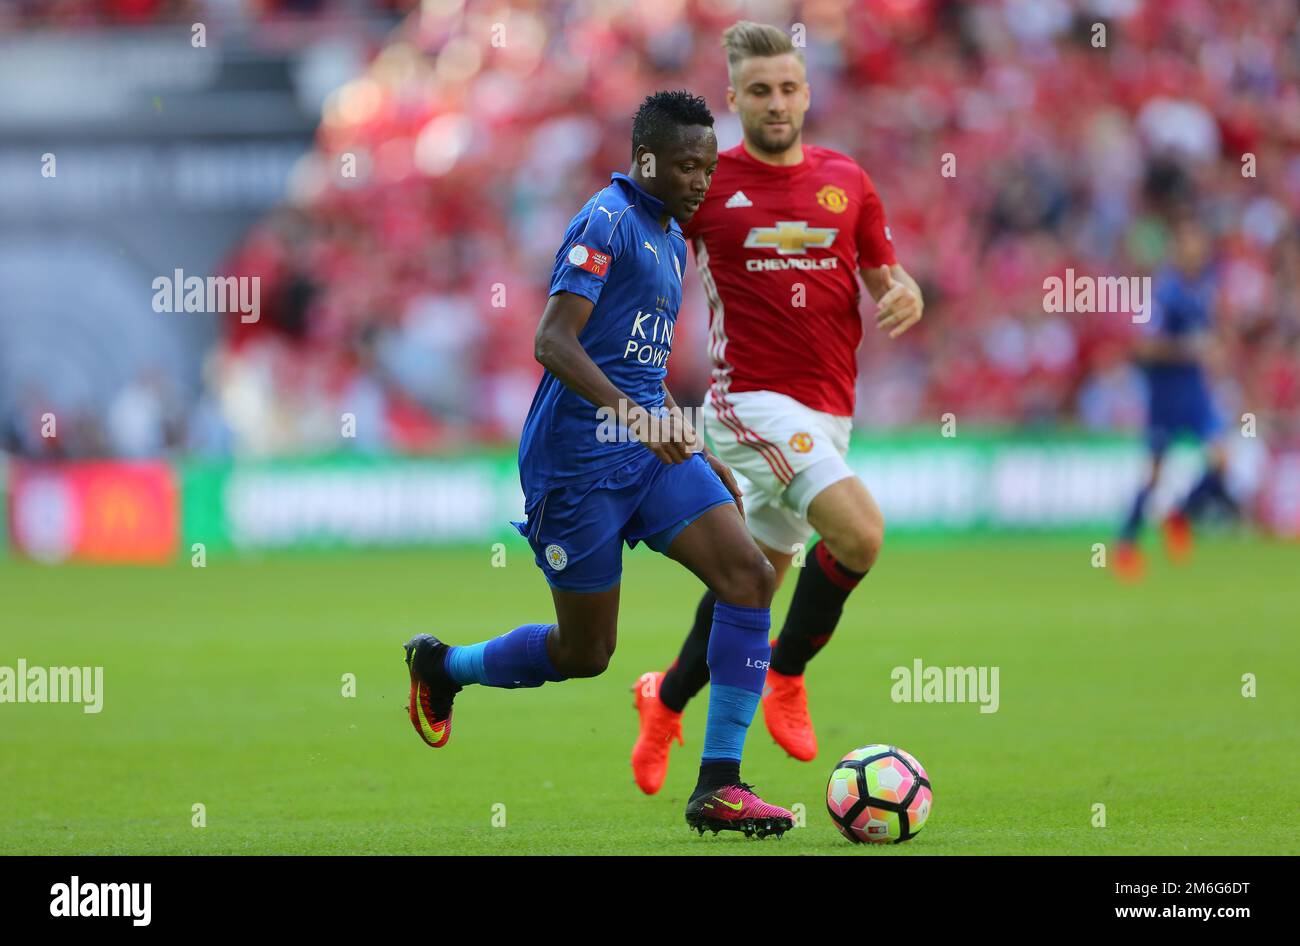 Ahmed Musa of Leicester City - Leicester City v Manchester United, FA Community Shield, Wembley Stadium, London - 7th August 2016 Stock Photo